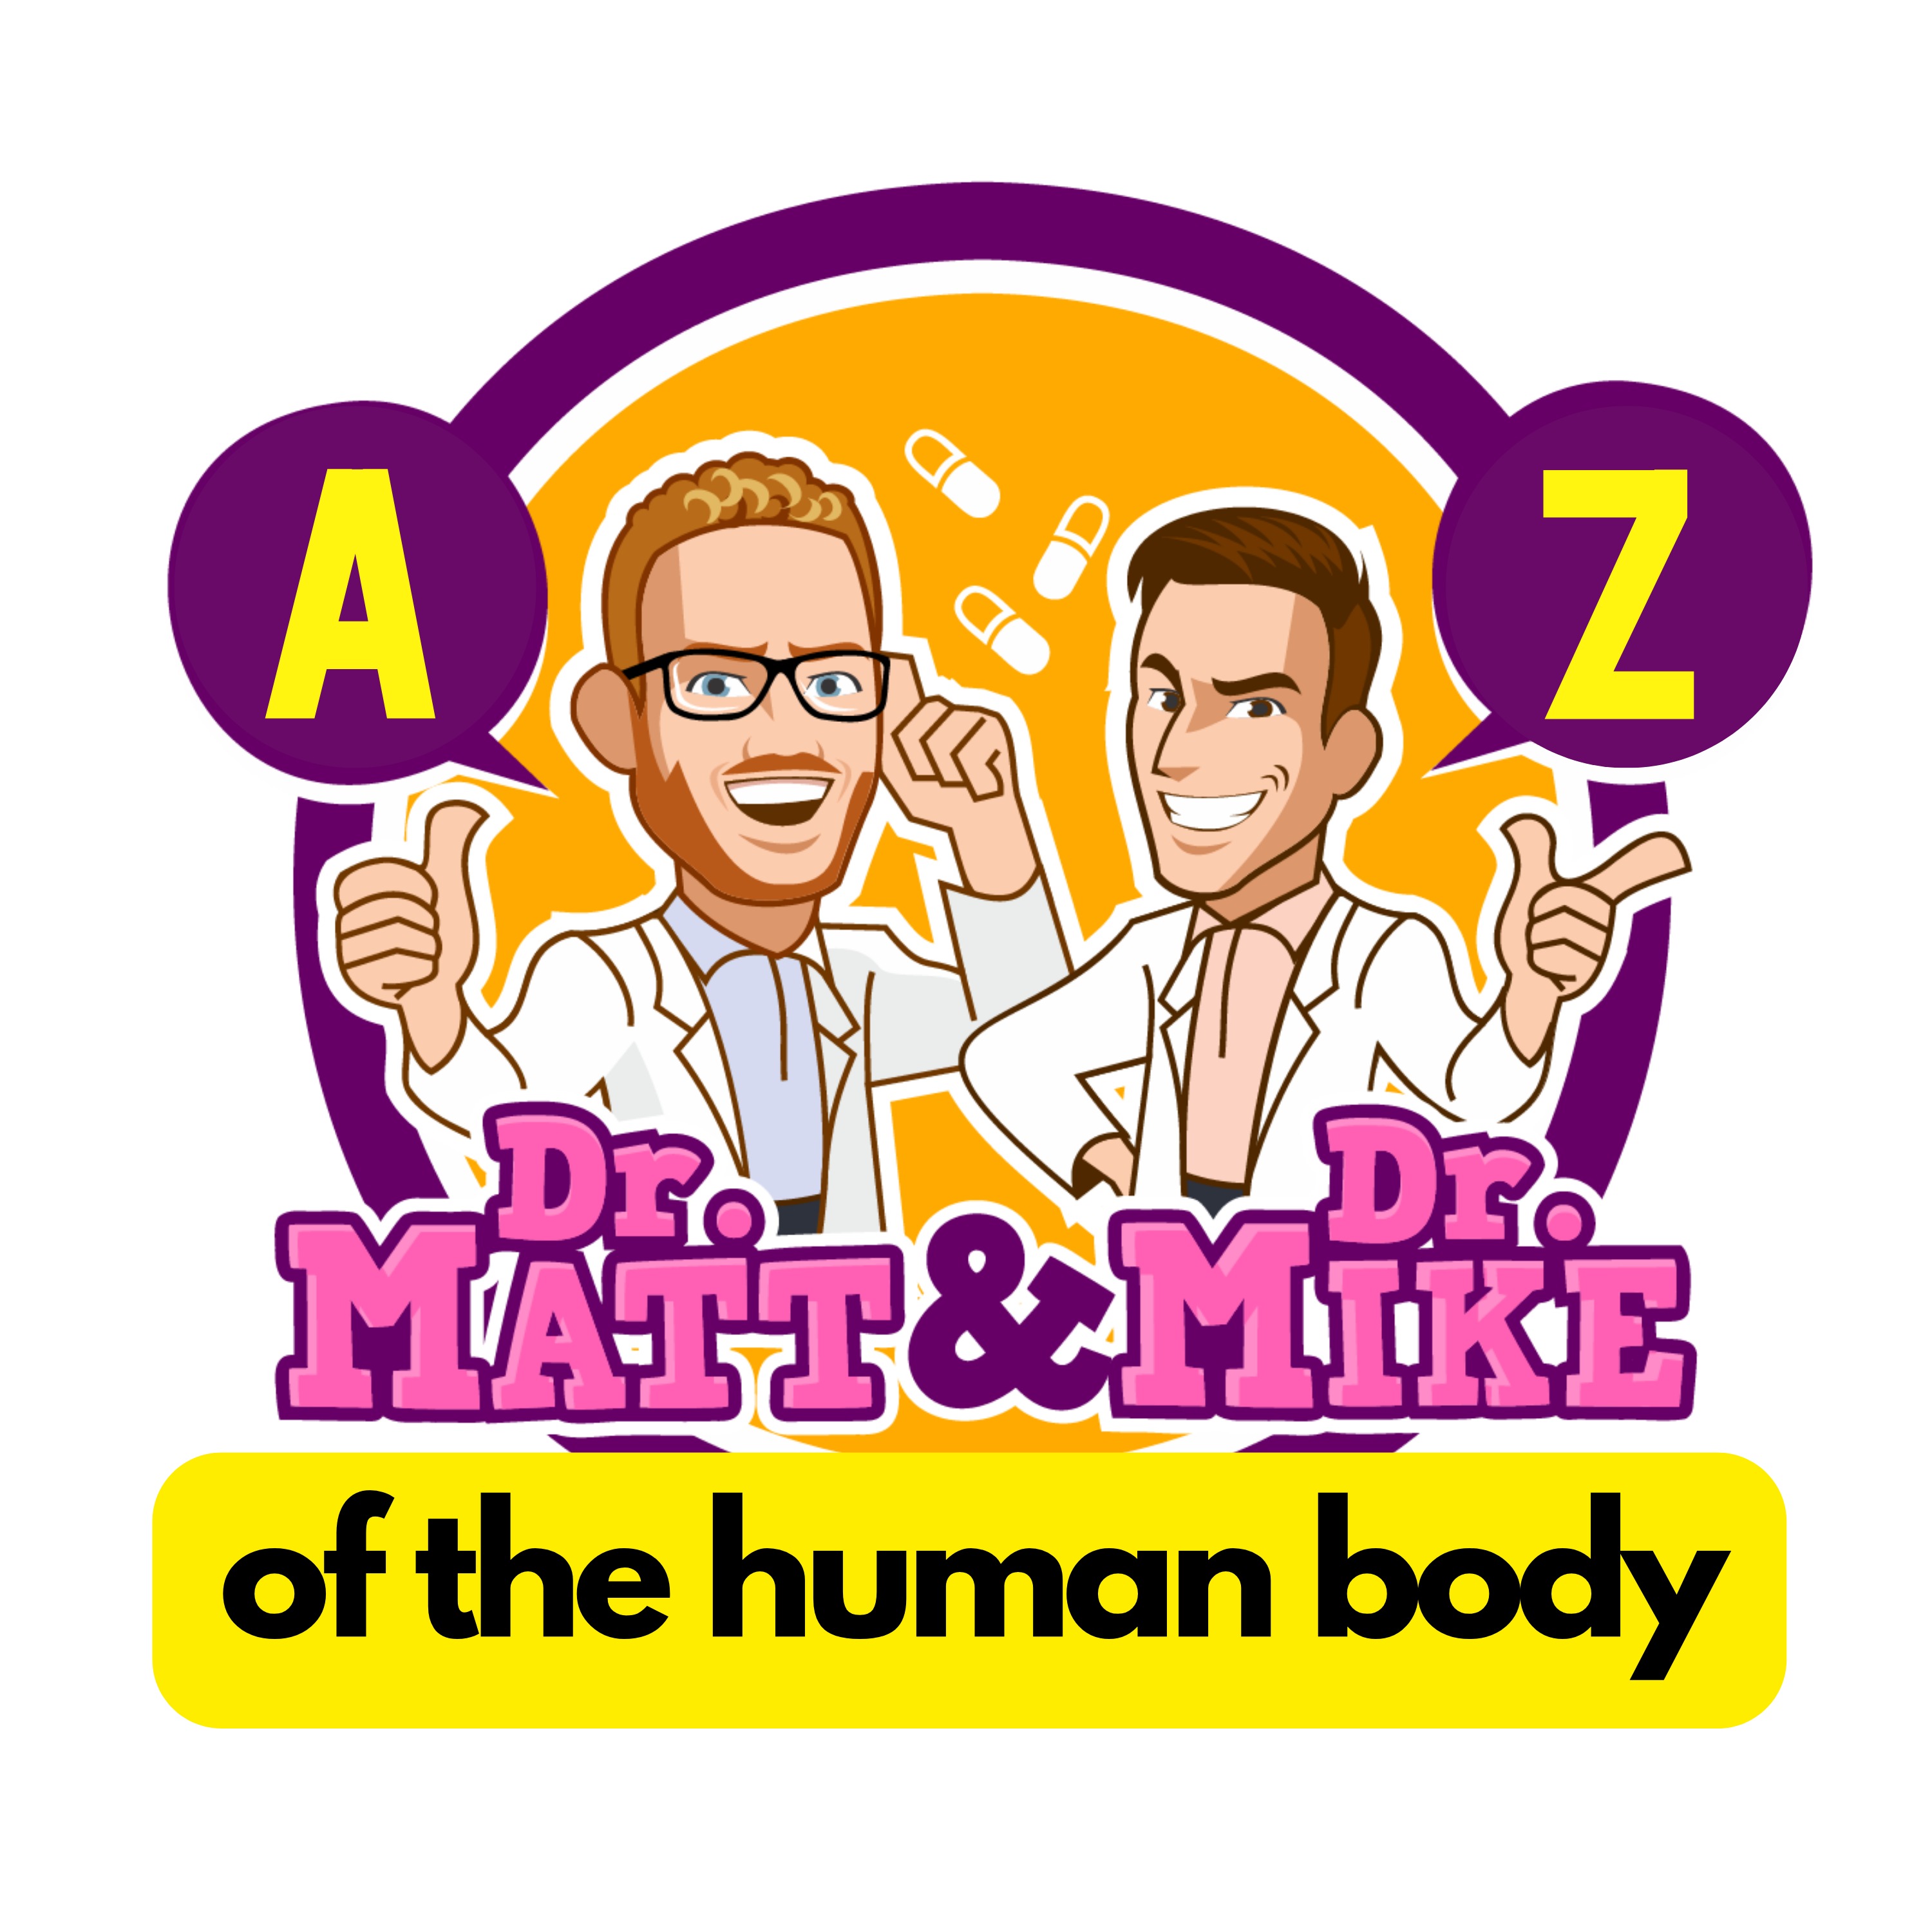 Amino Acids | A-Z of the Human Body